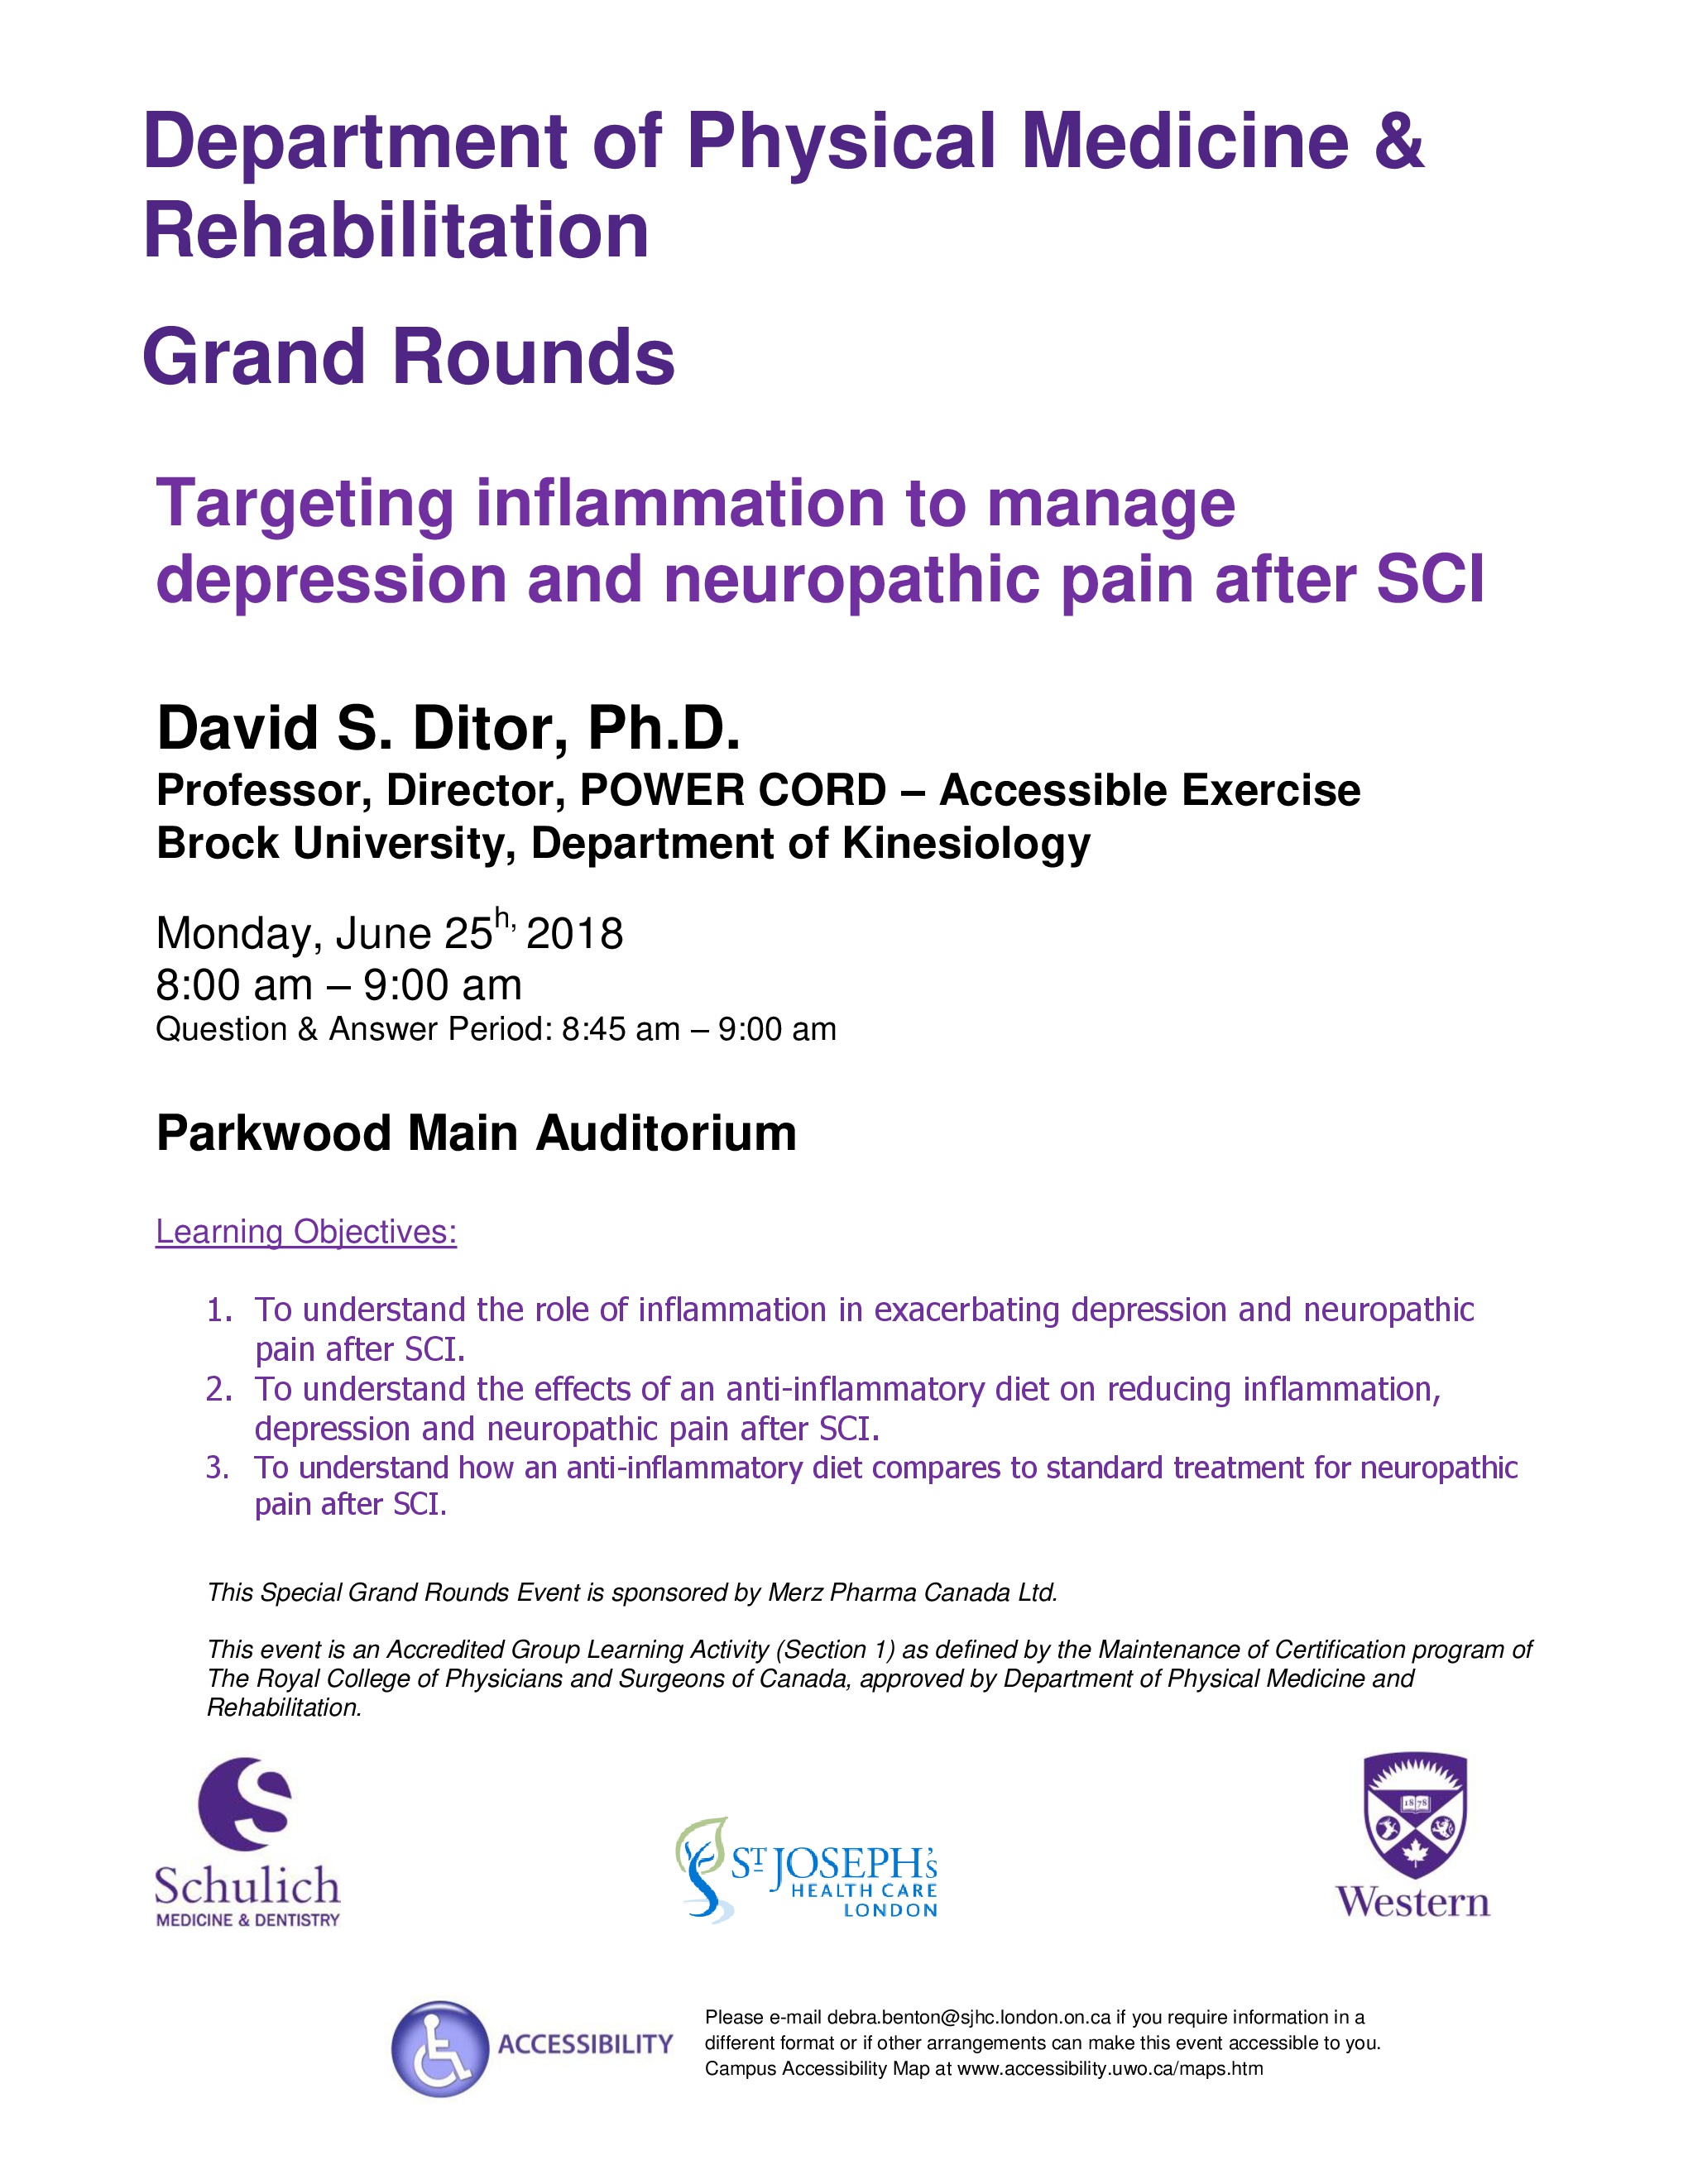 Grand Rounds Poster